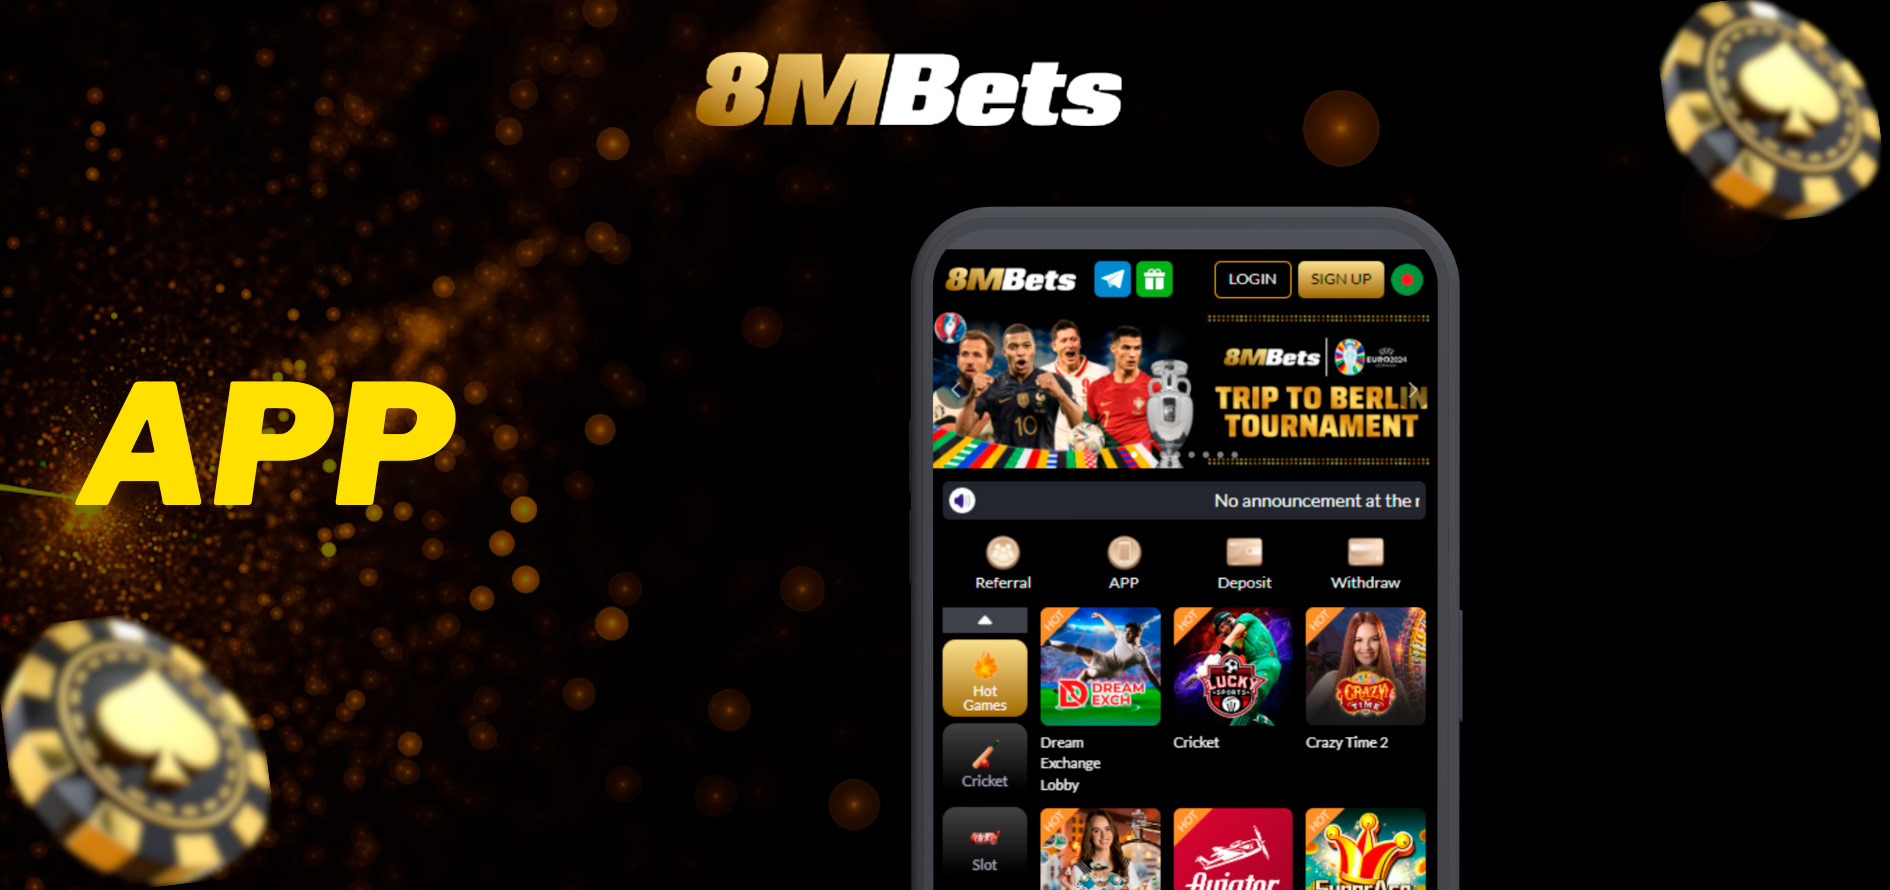 Discover the Excitement of Online Betting with the 8mbets App